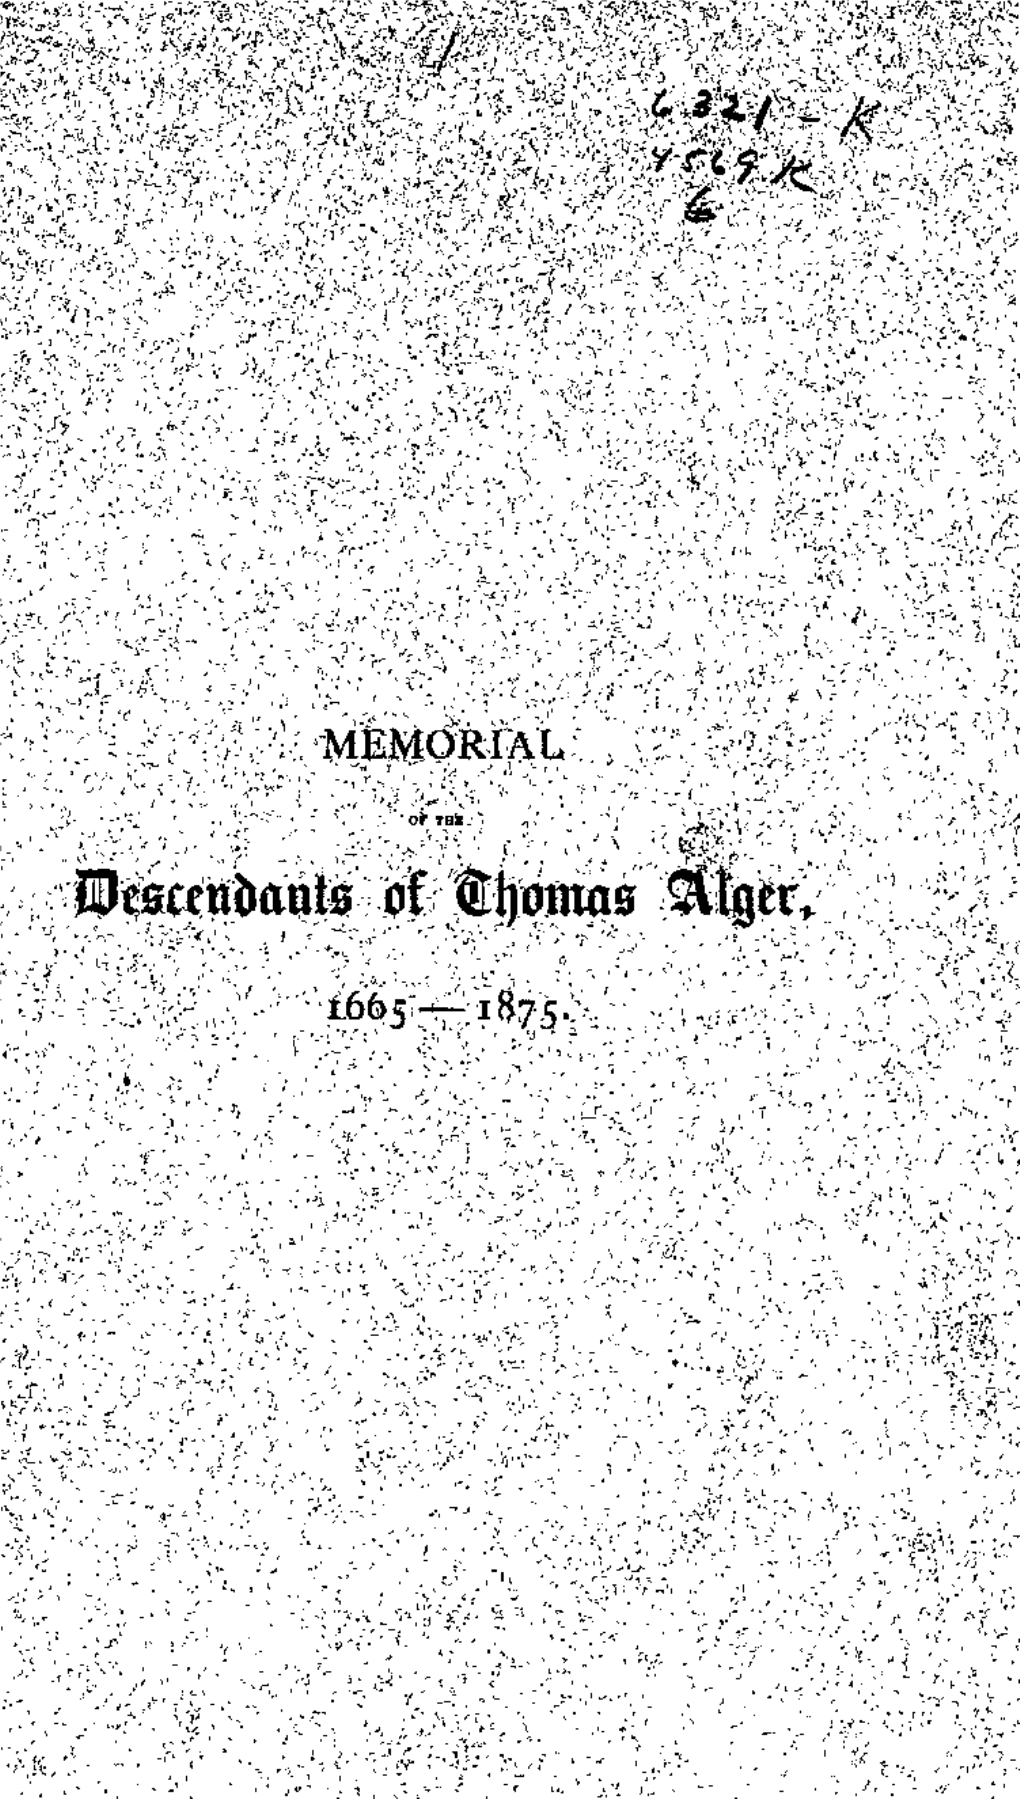 A Genealogical History of That Branch of the Alger Family Which Springs